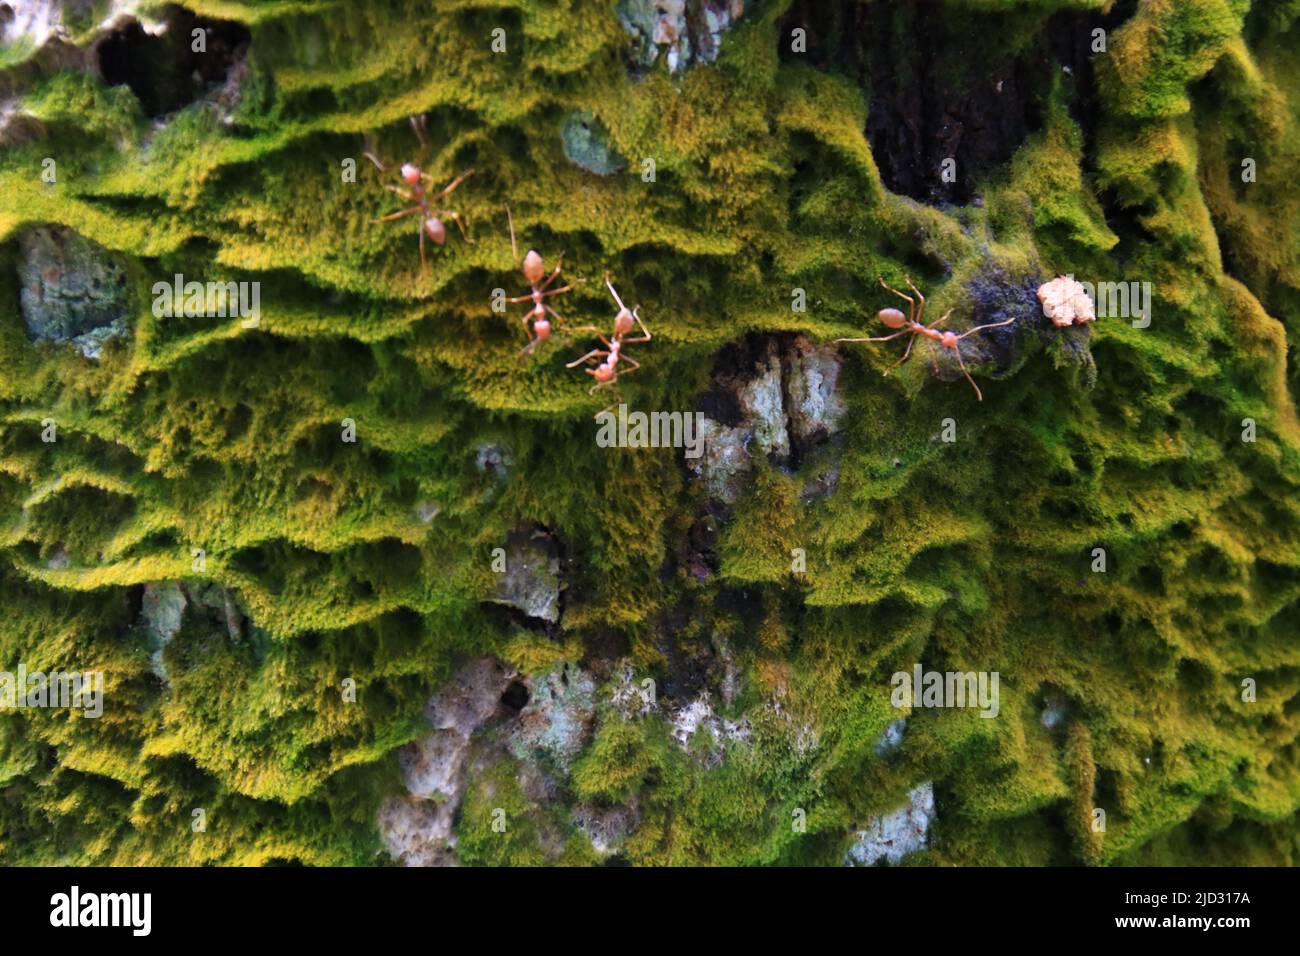 Green Tree Moss with Weaving Ants Stock Photo